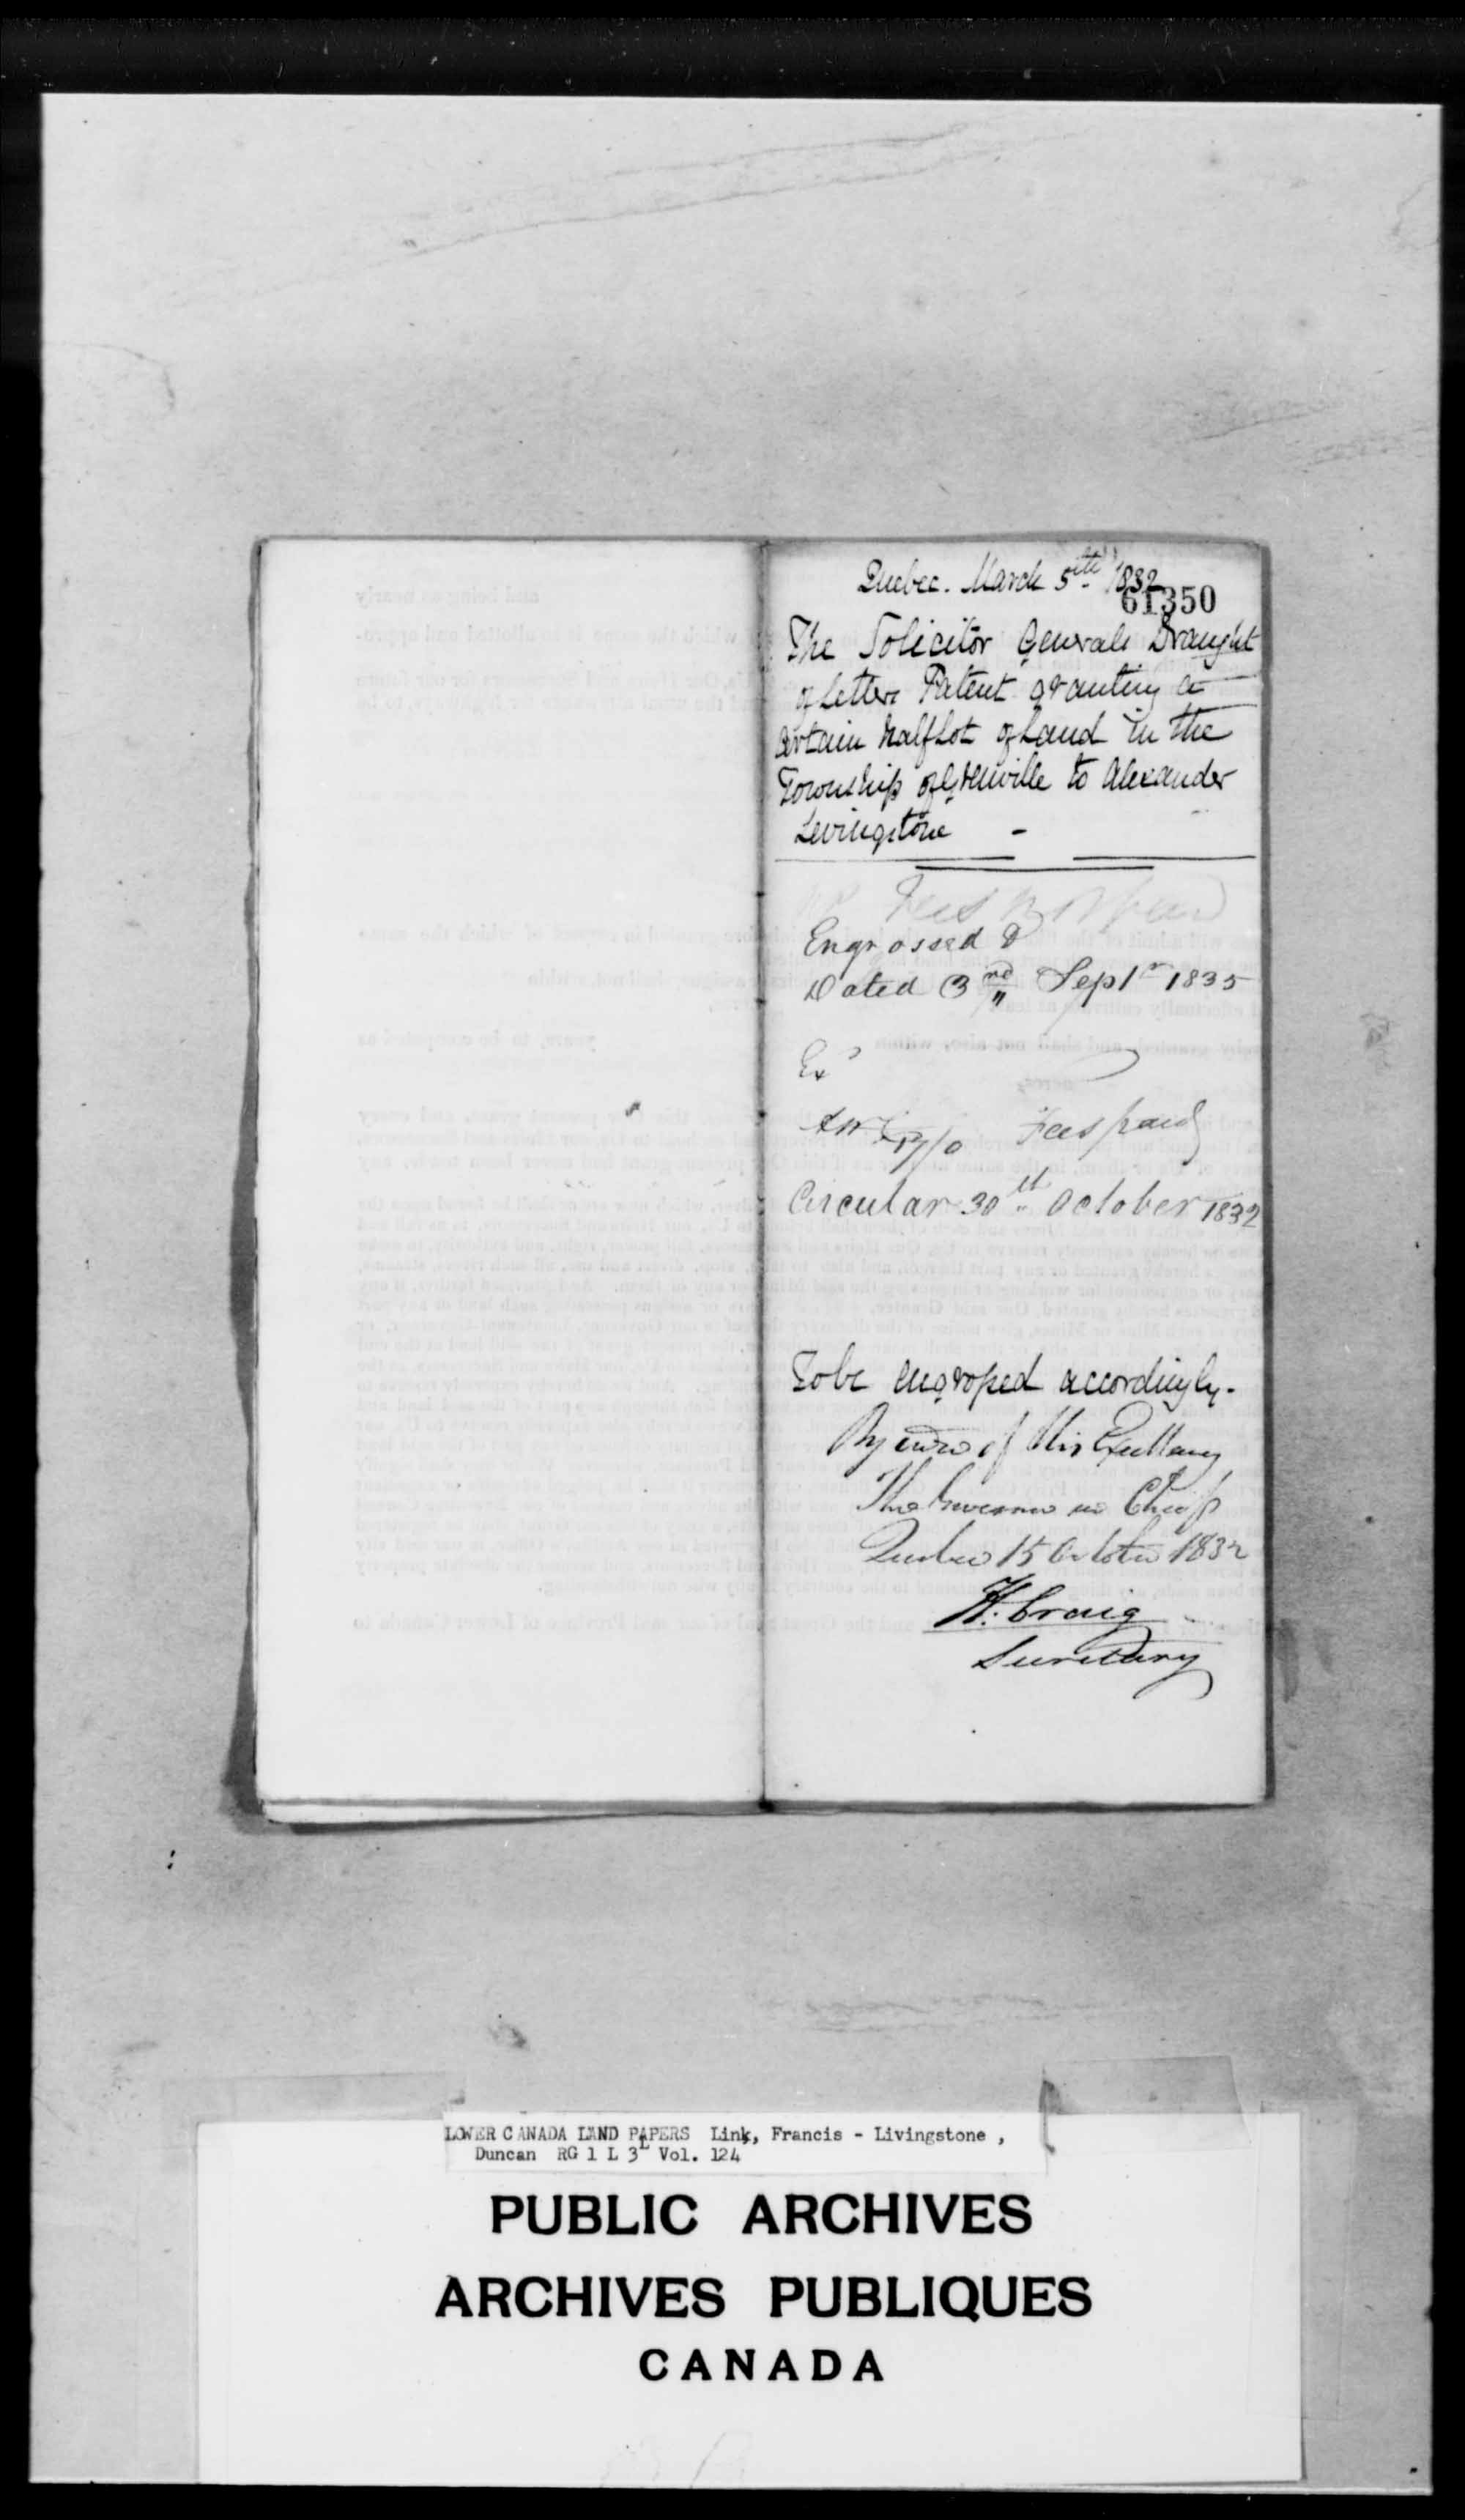 Digitized page of  for Image No.: e008706199